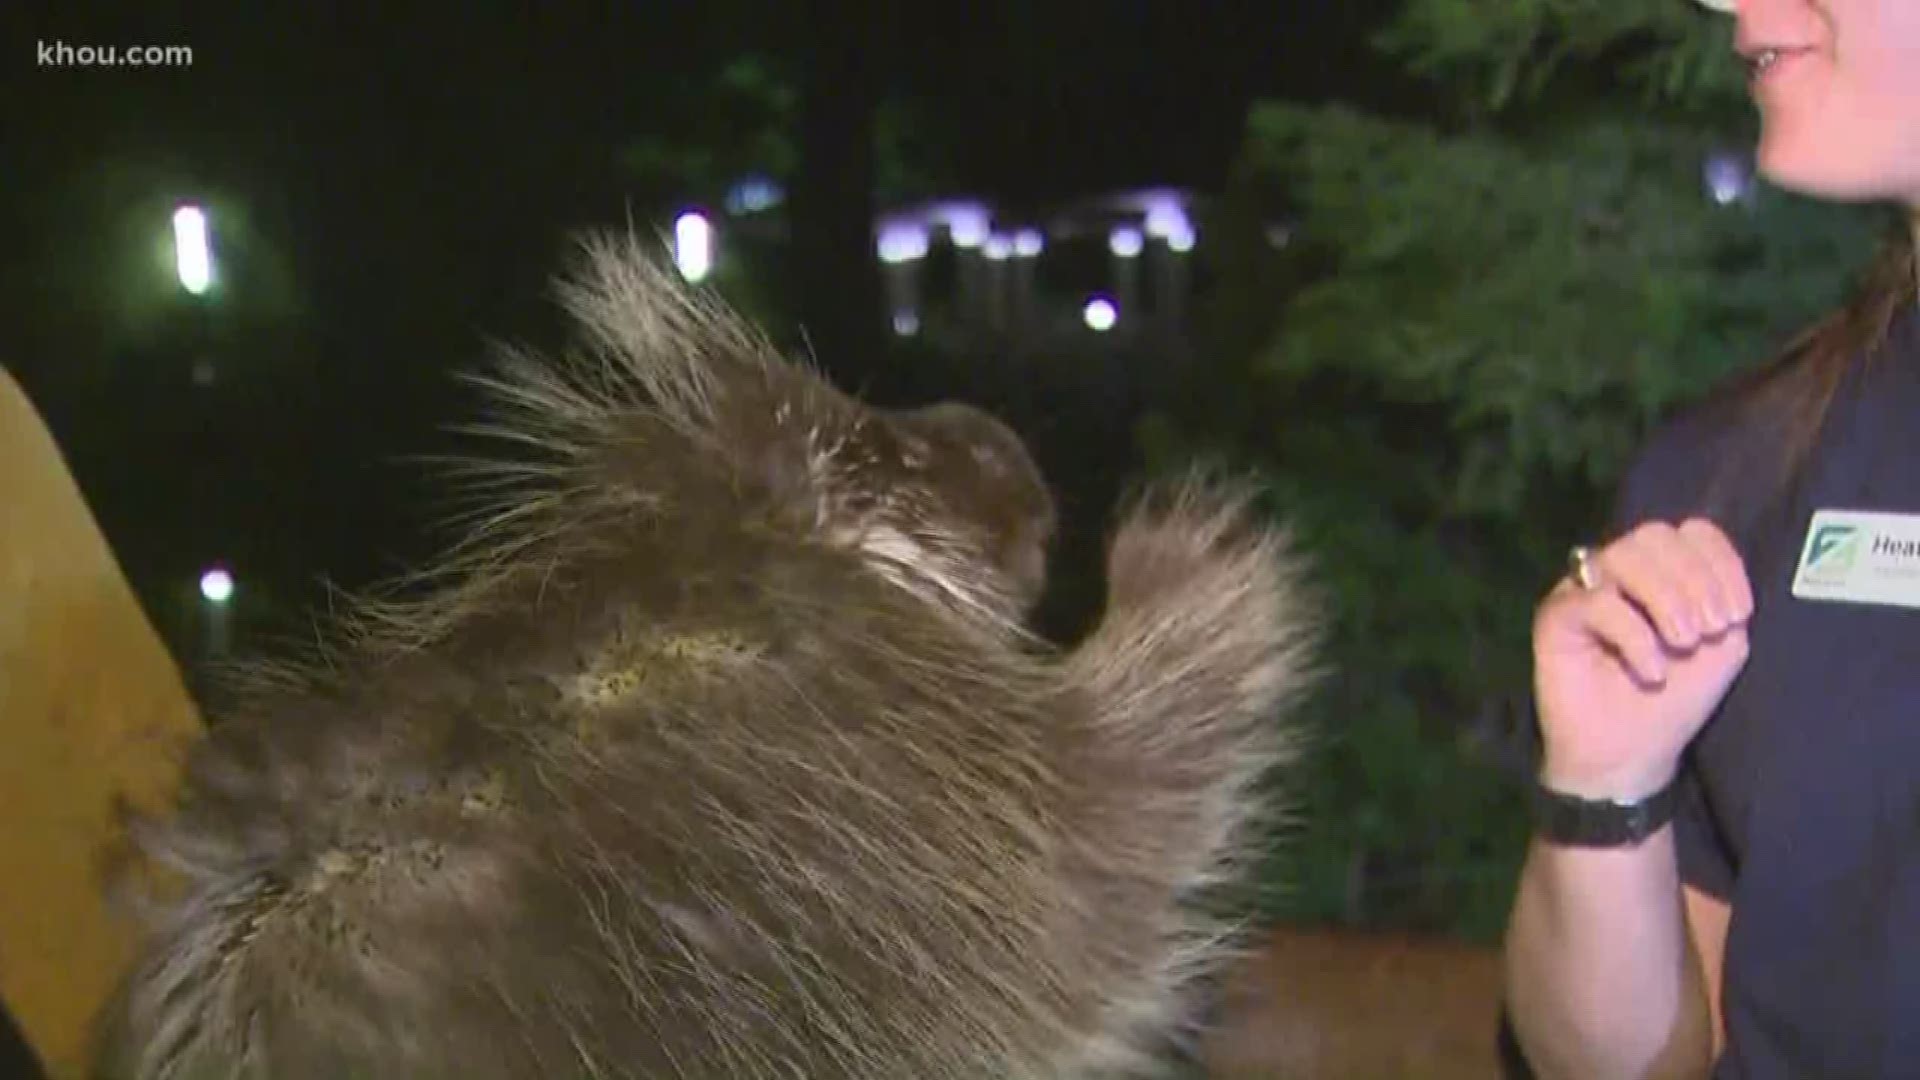 Come out and meet Ernie the porcupine at the new Texas Wetlands at the Houston Zoo opening Friday. Ruben Galvan has more.